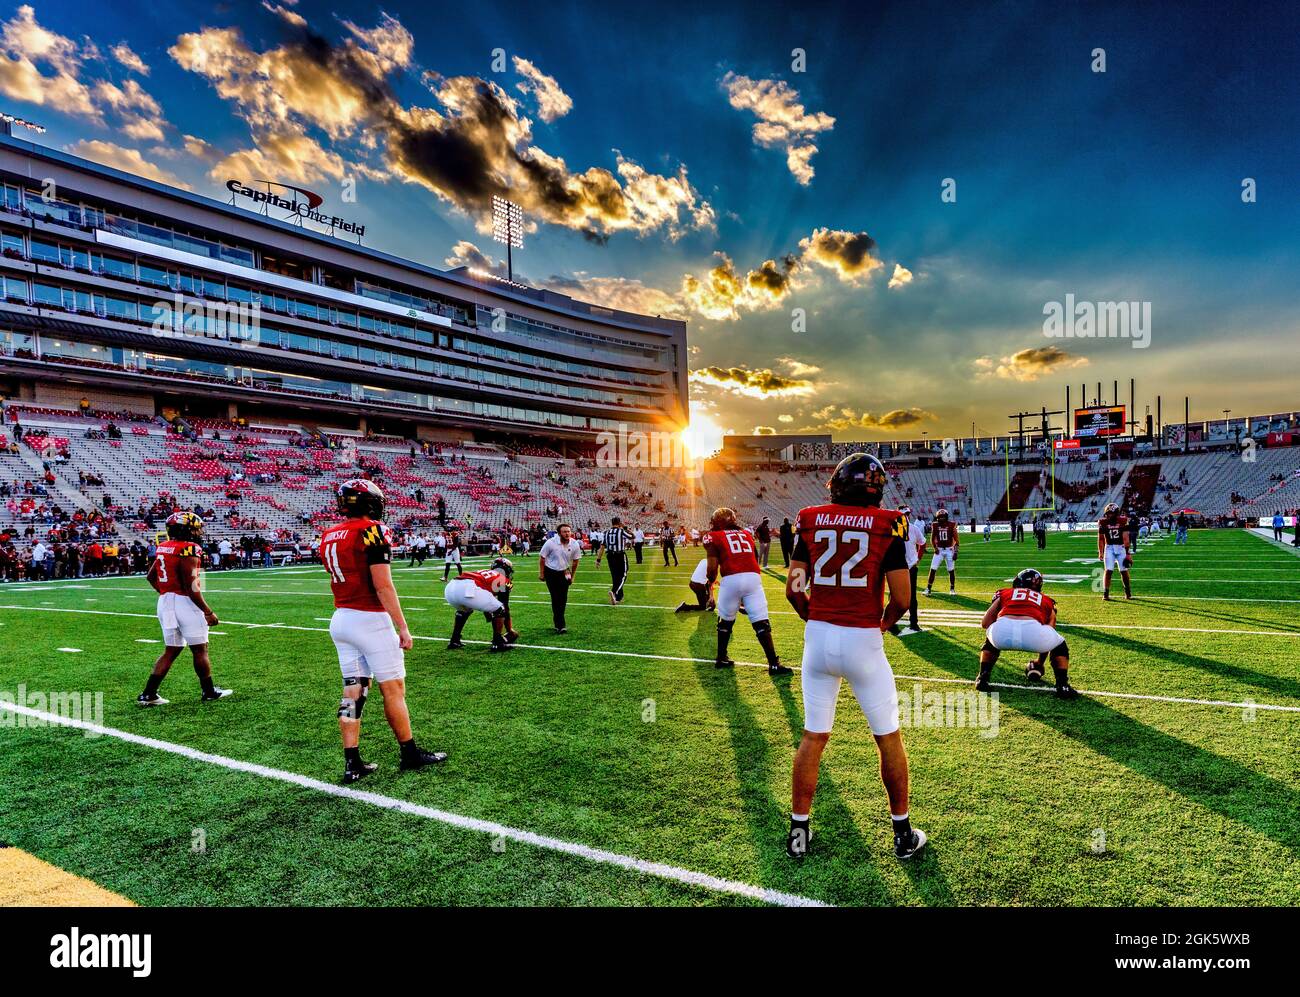 COLLEGE PARK, MD - SEPTEMBER 11: University of Maryland football players warm up before a game Stock Photo